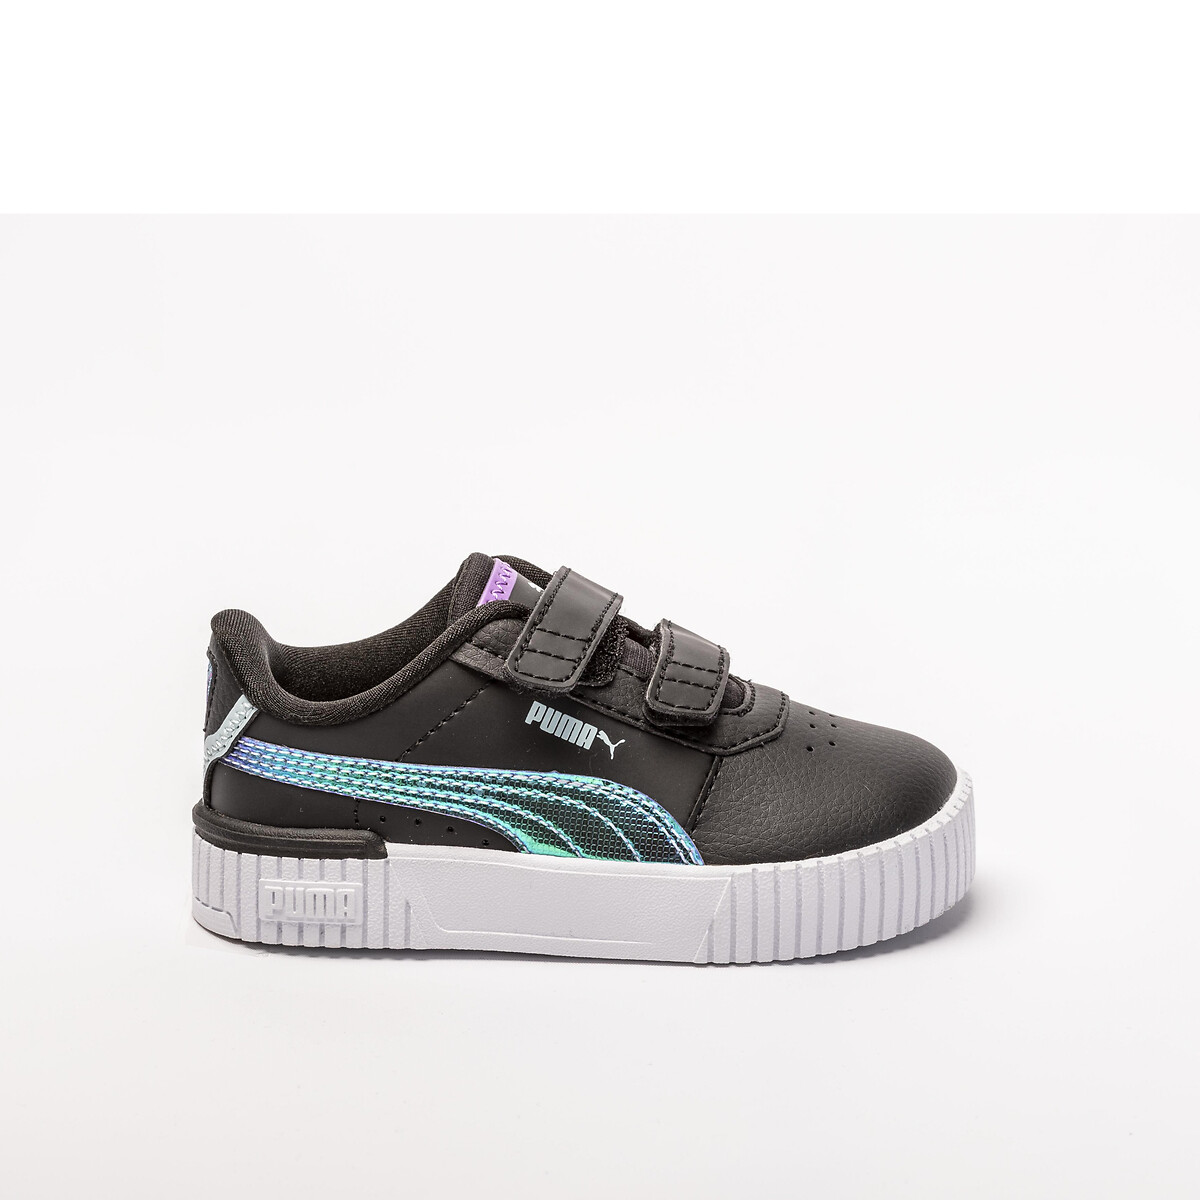 Kids Carina 2.0 Deep Dive Trainers with Touch ’n’ Close Fastening